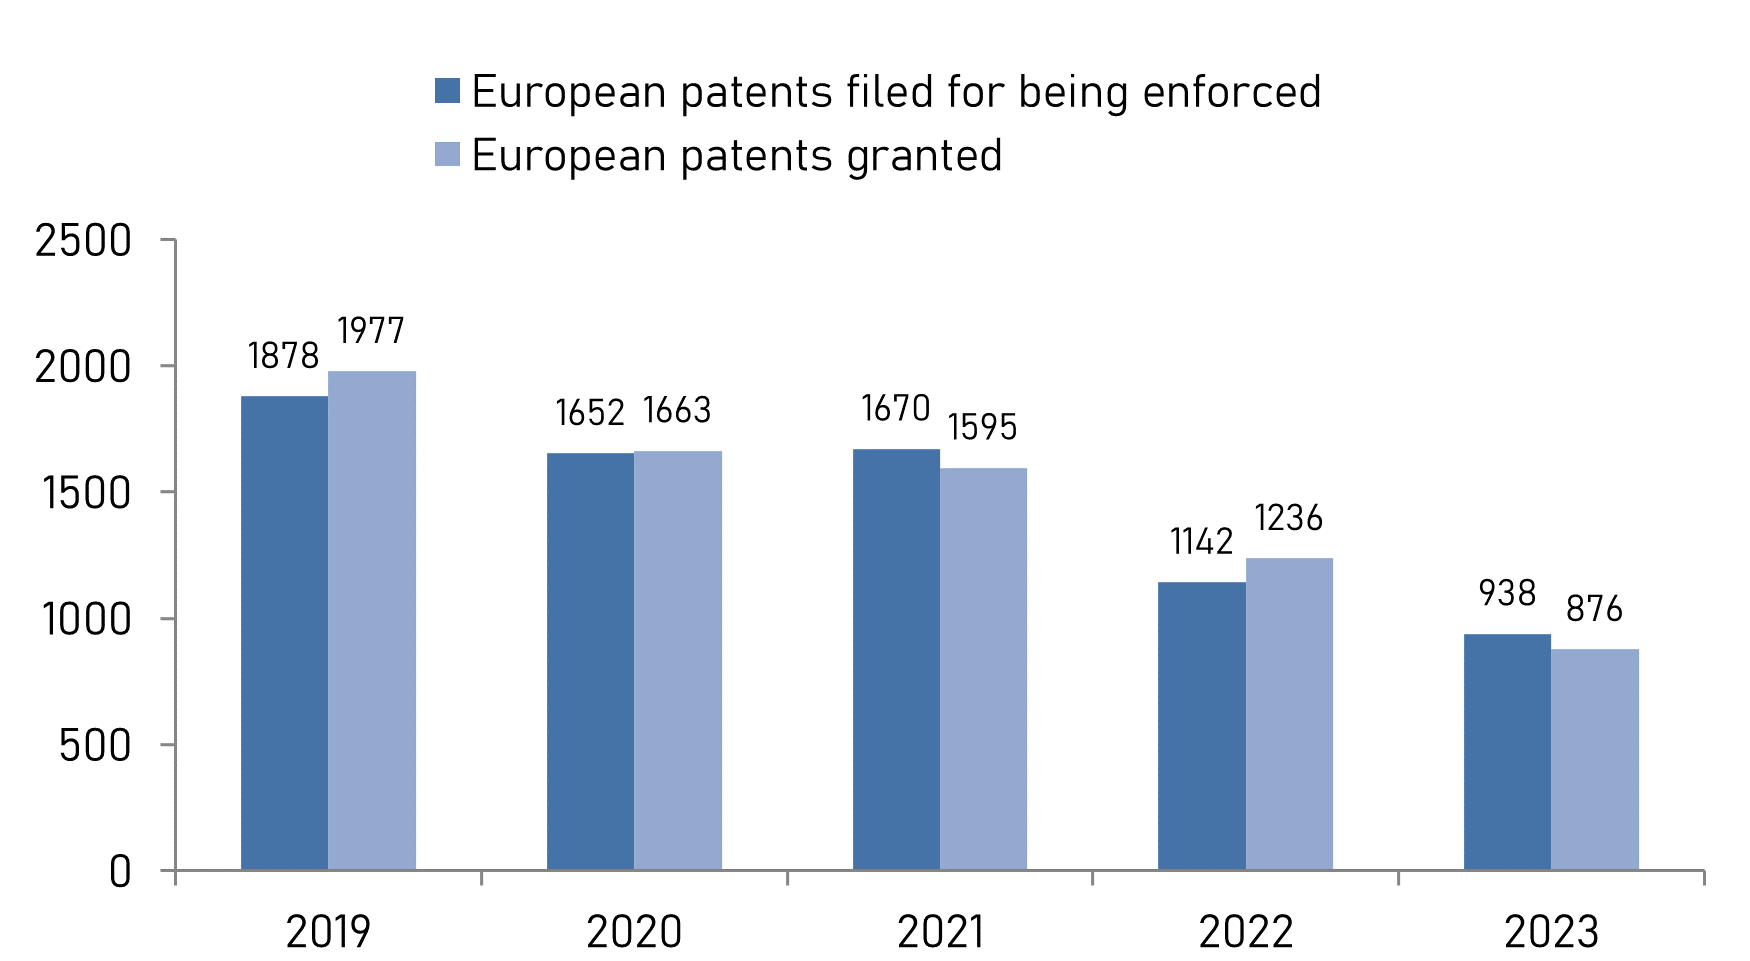 European patents filed for being enforced with the Patent Office and granted European patents 2019-2023